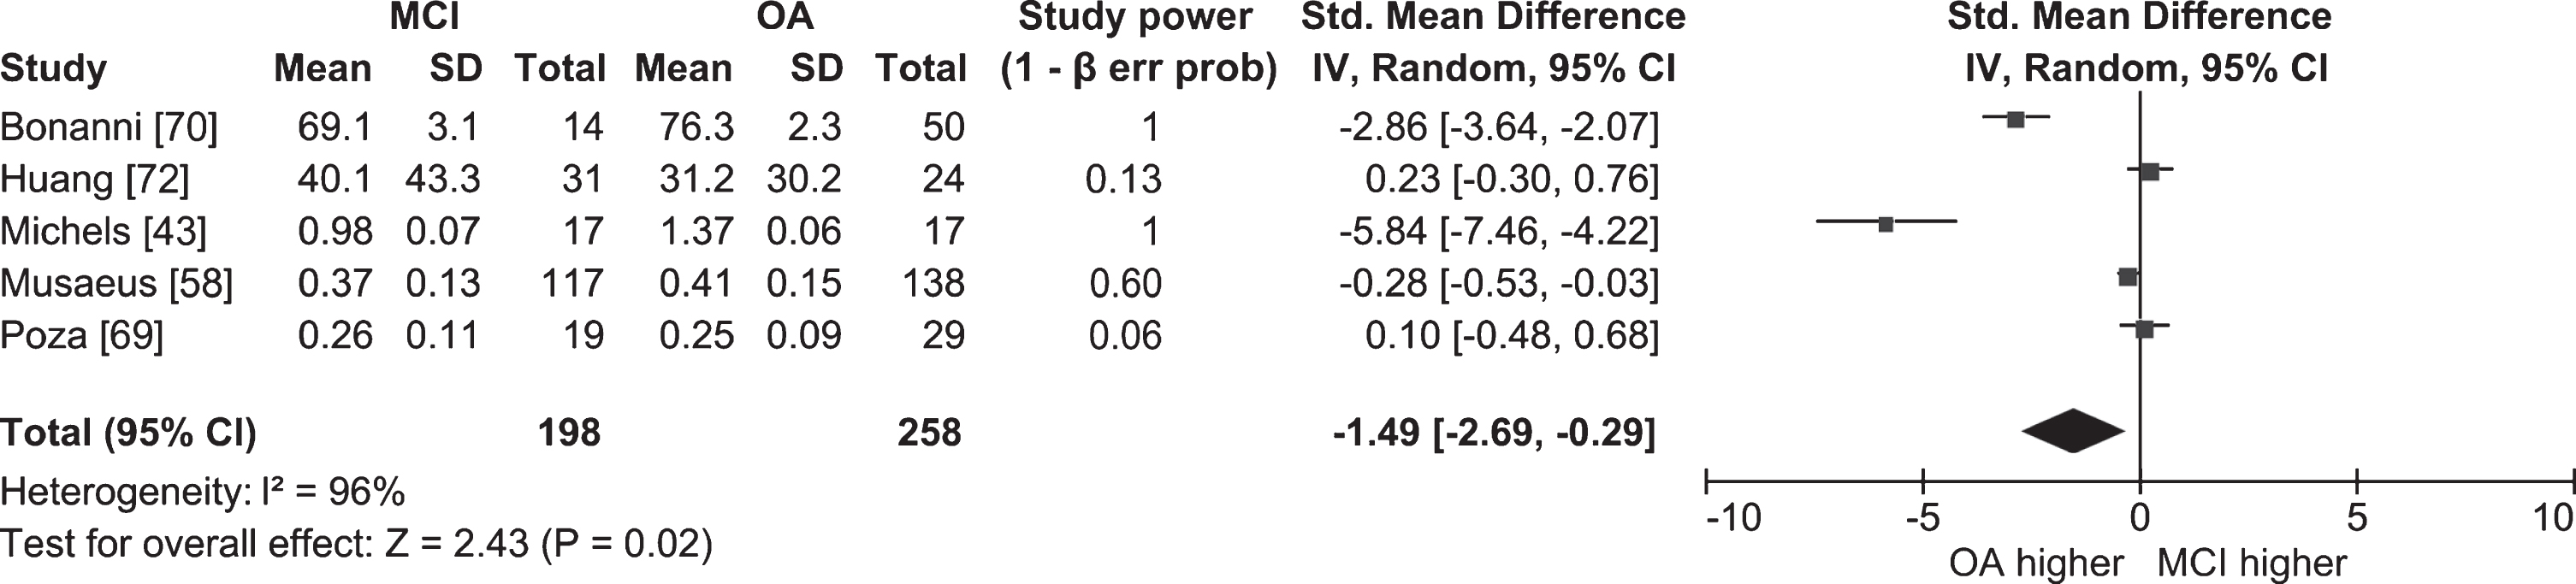 Table and forest plot of effect sizes for power in awake resting state in the full alpha band in people with MCI versus cognitively healthy older adults (OA). The table shows mean, standard deviation (SD) and sample size (Total) for each participant group, and power for each study. Standardized mean difference and 95% confidence intervals (CI) for each study are shown in the table and in the forest plot as squares. The size of the square represents the weight of the study, and the whiskers the CI. Standardized mean difference was calculated by subtracting the mean alpha power of the OA group from that of the MCI group and dividing it by the standard deviation of alpha power among both groups. The overall effect size and 95% CI are shown in the table and in the forest plot as a diamond. The width of the diamond represents 95% CI. Statistical significance of the overall effect was calculated with the z-test.